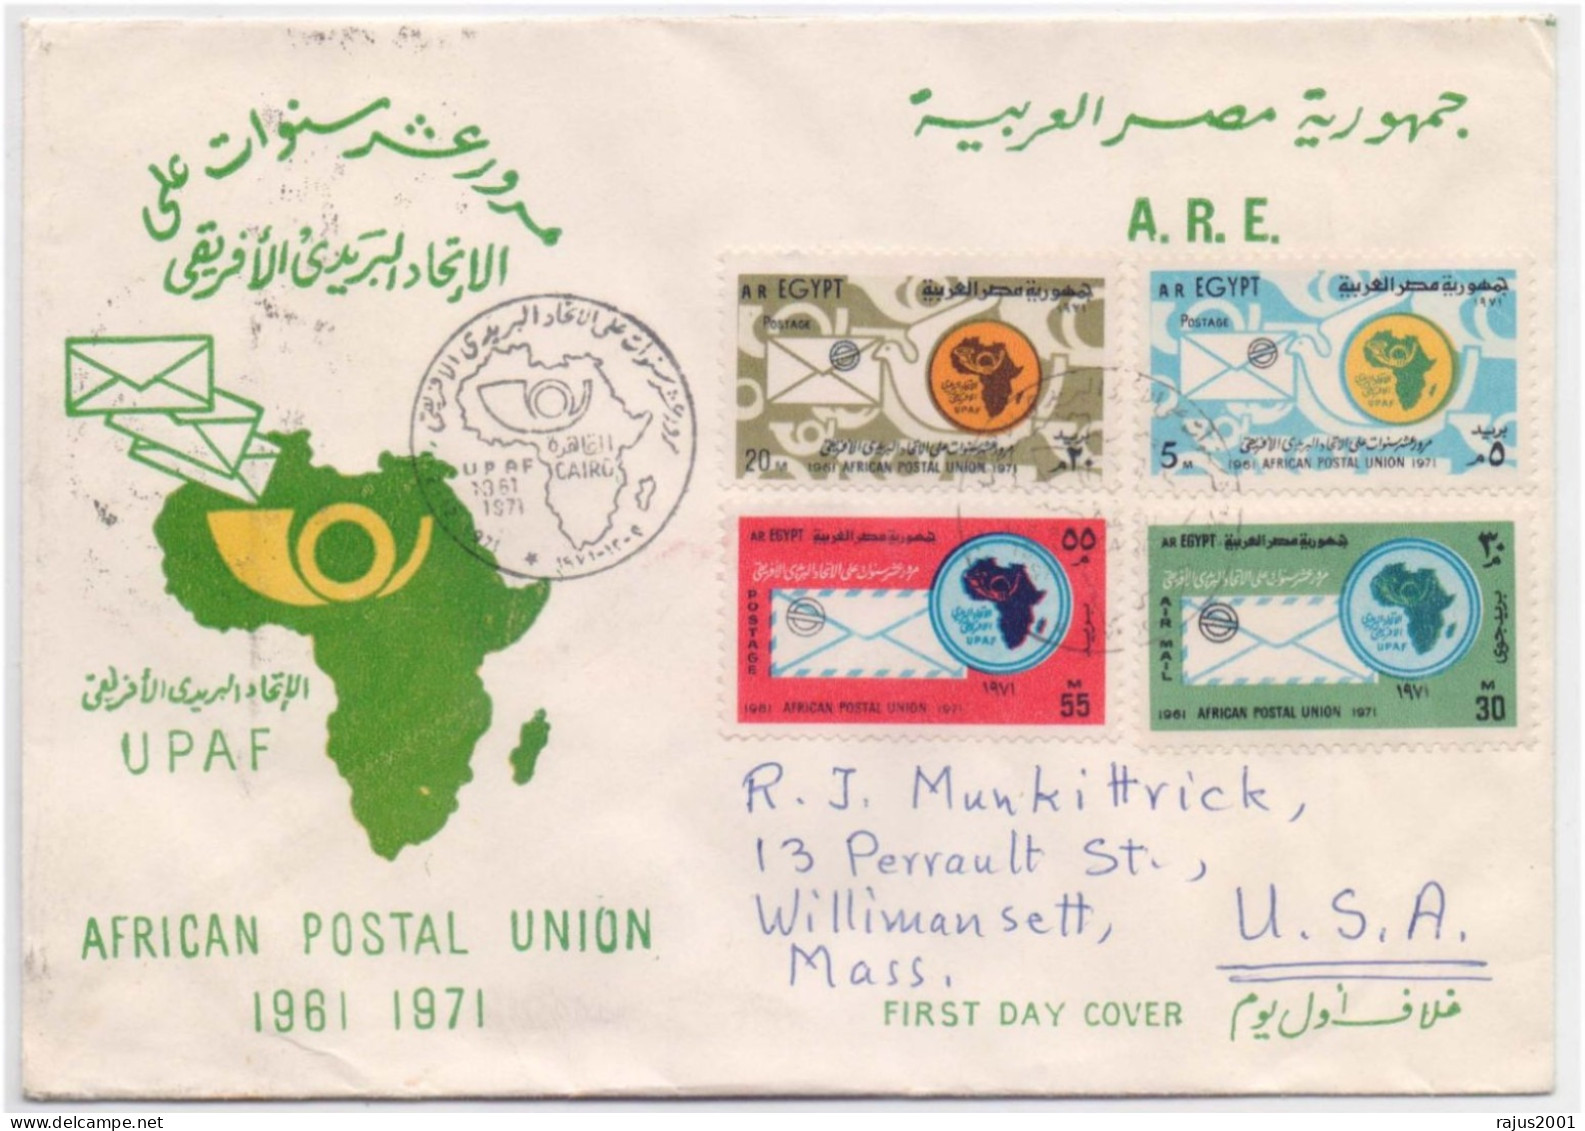 UPAF, African Postal Union, Mail Letter, Pigeon, Map, Transport Service, Egypt To USA Circulated Cover 1971 - Post